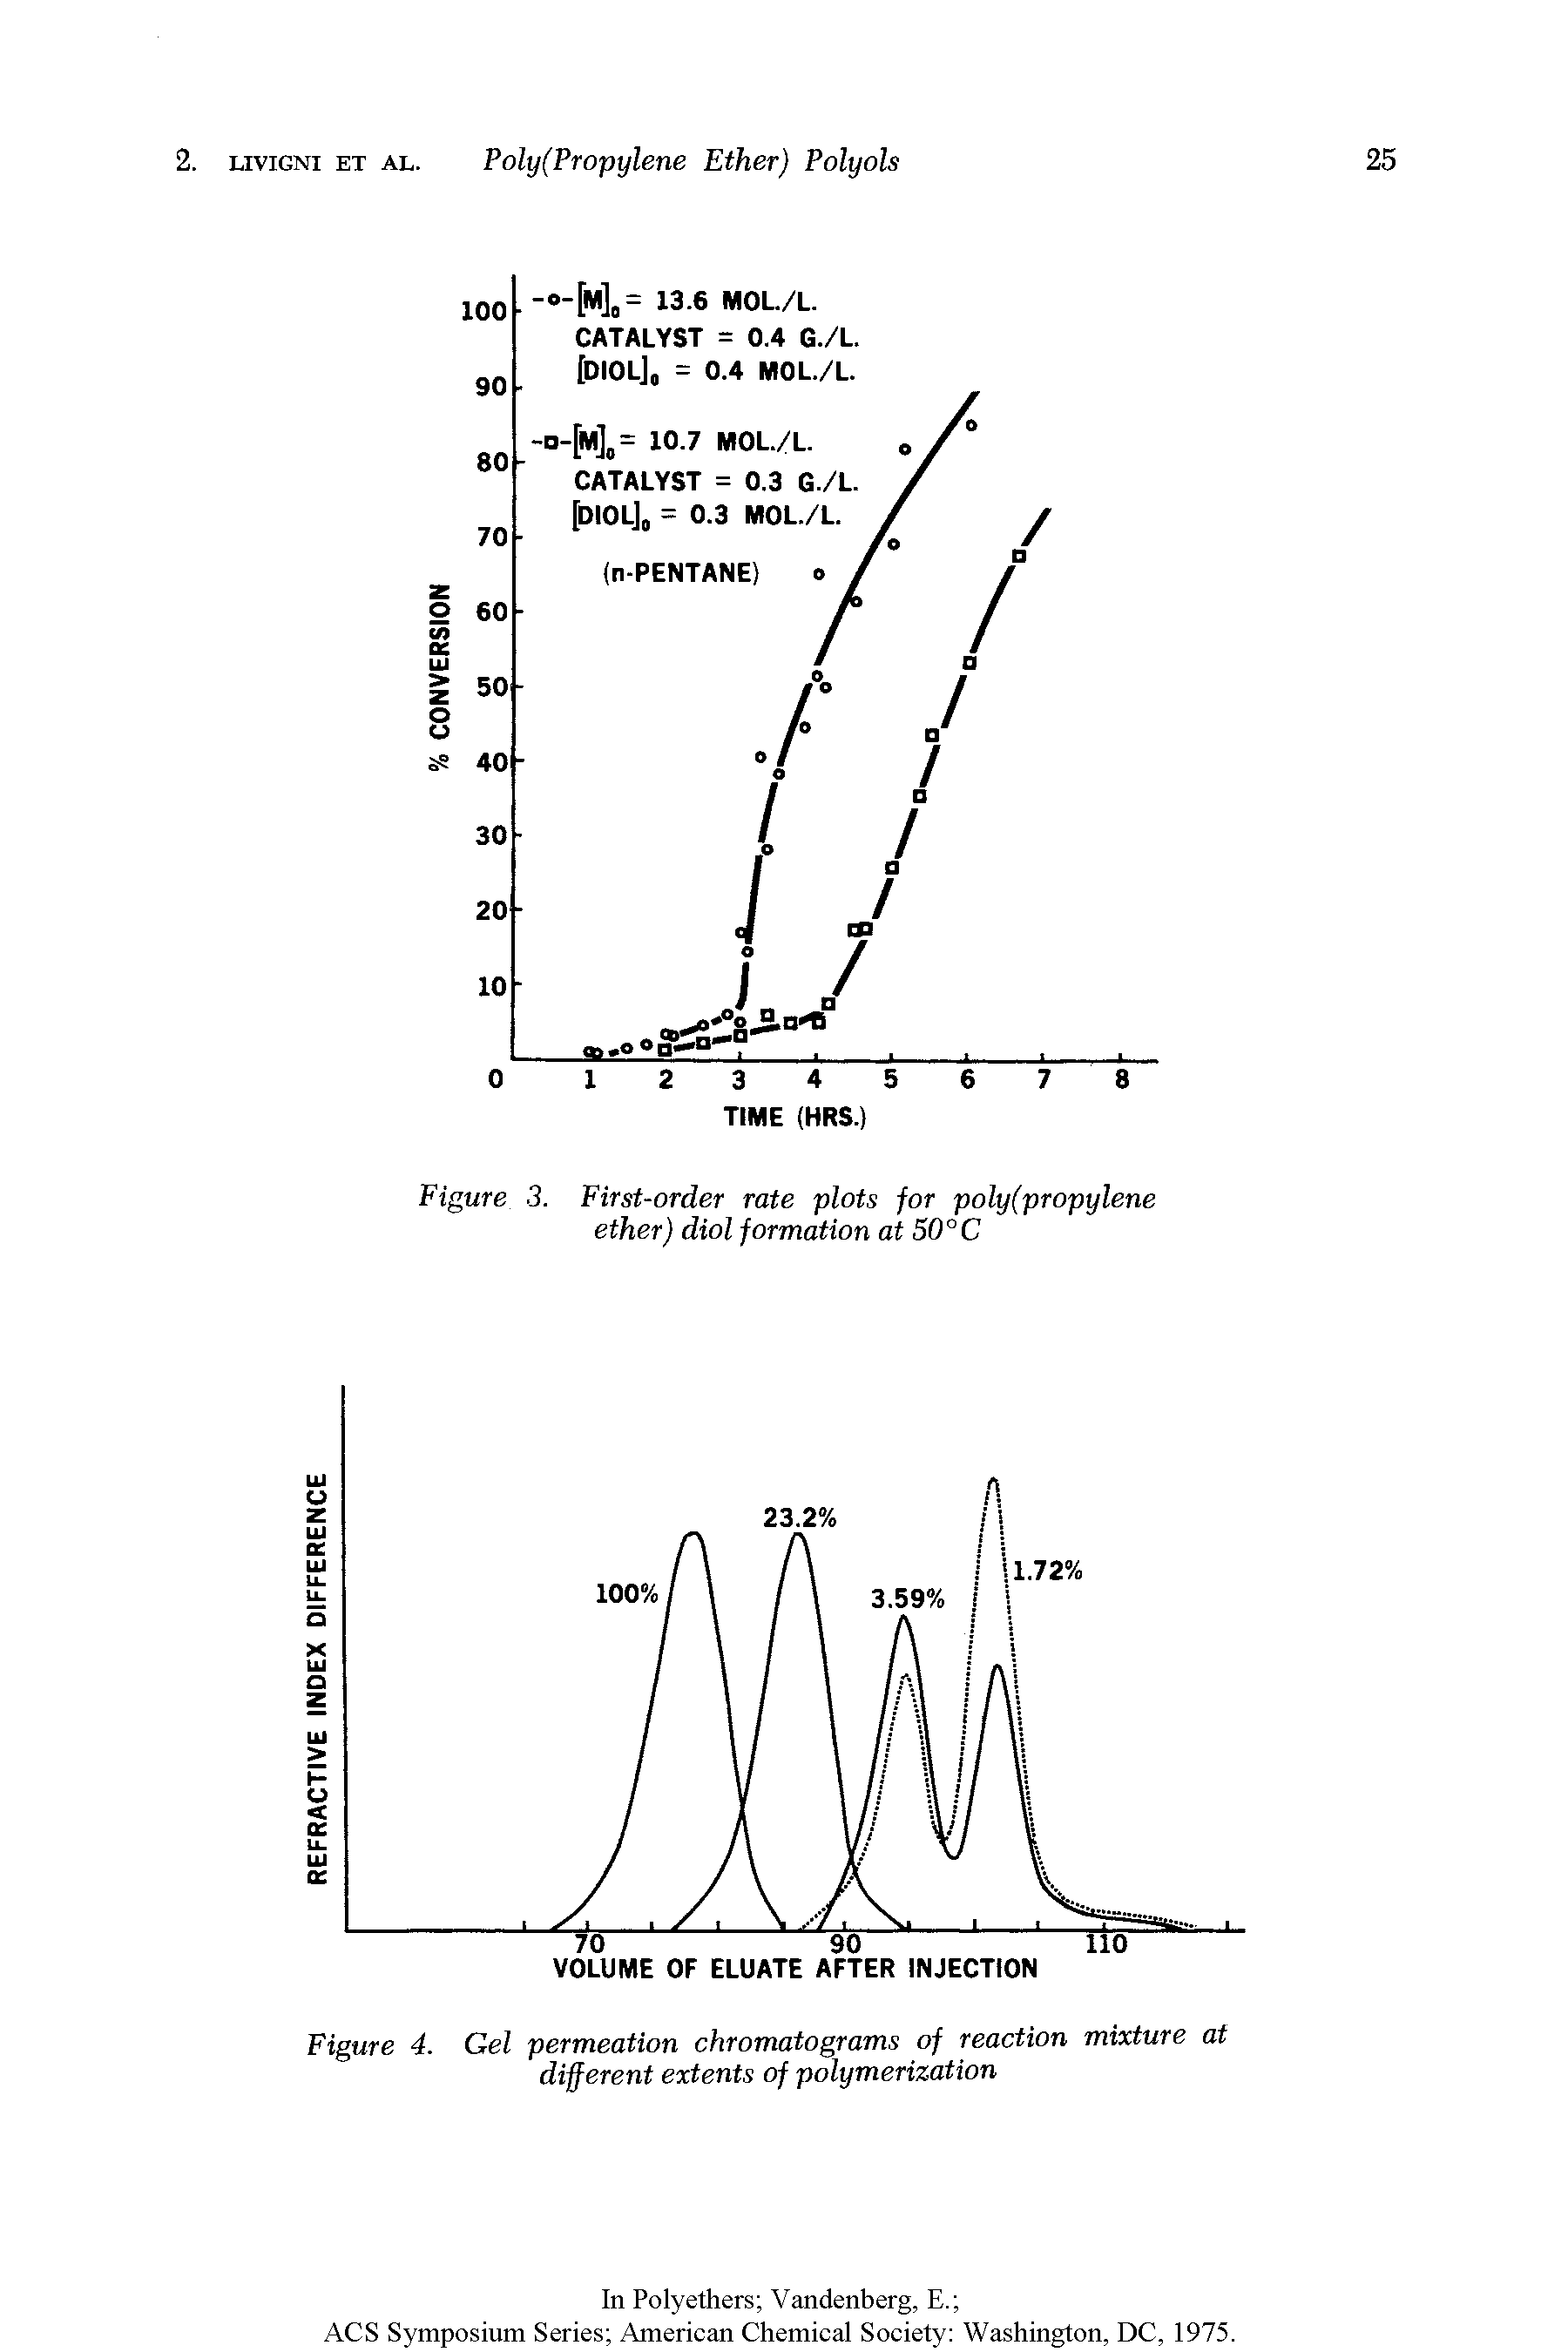 Figure 3. First-order rate plots for poly(propylene ether) diol formation at 50°C...